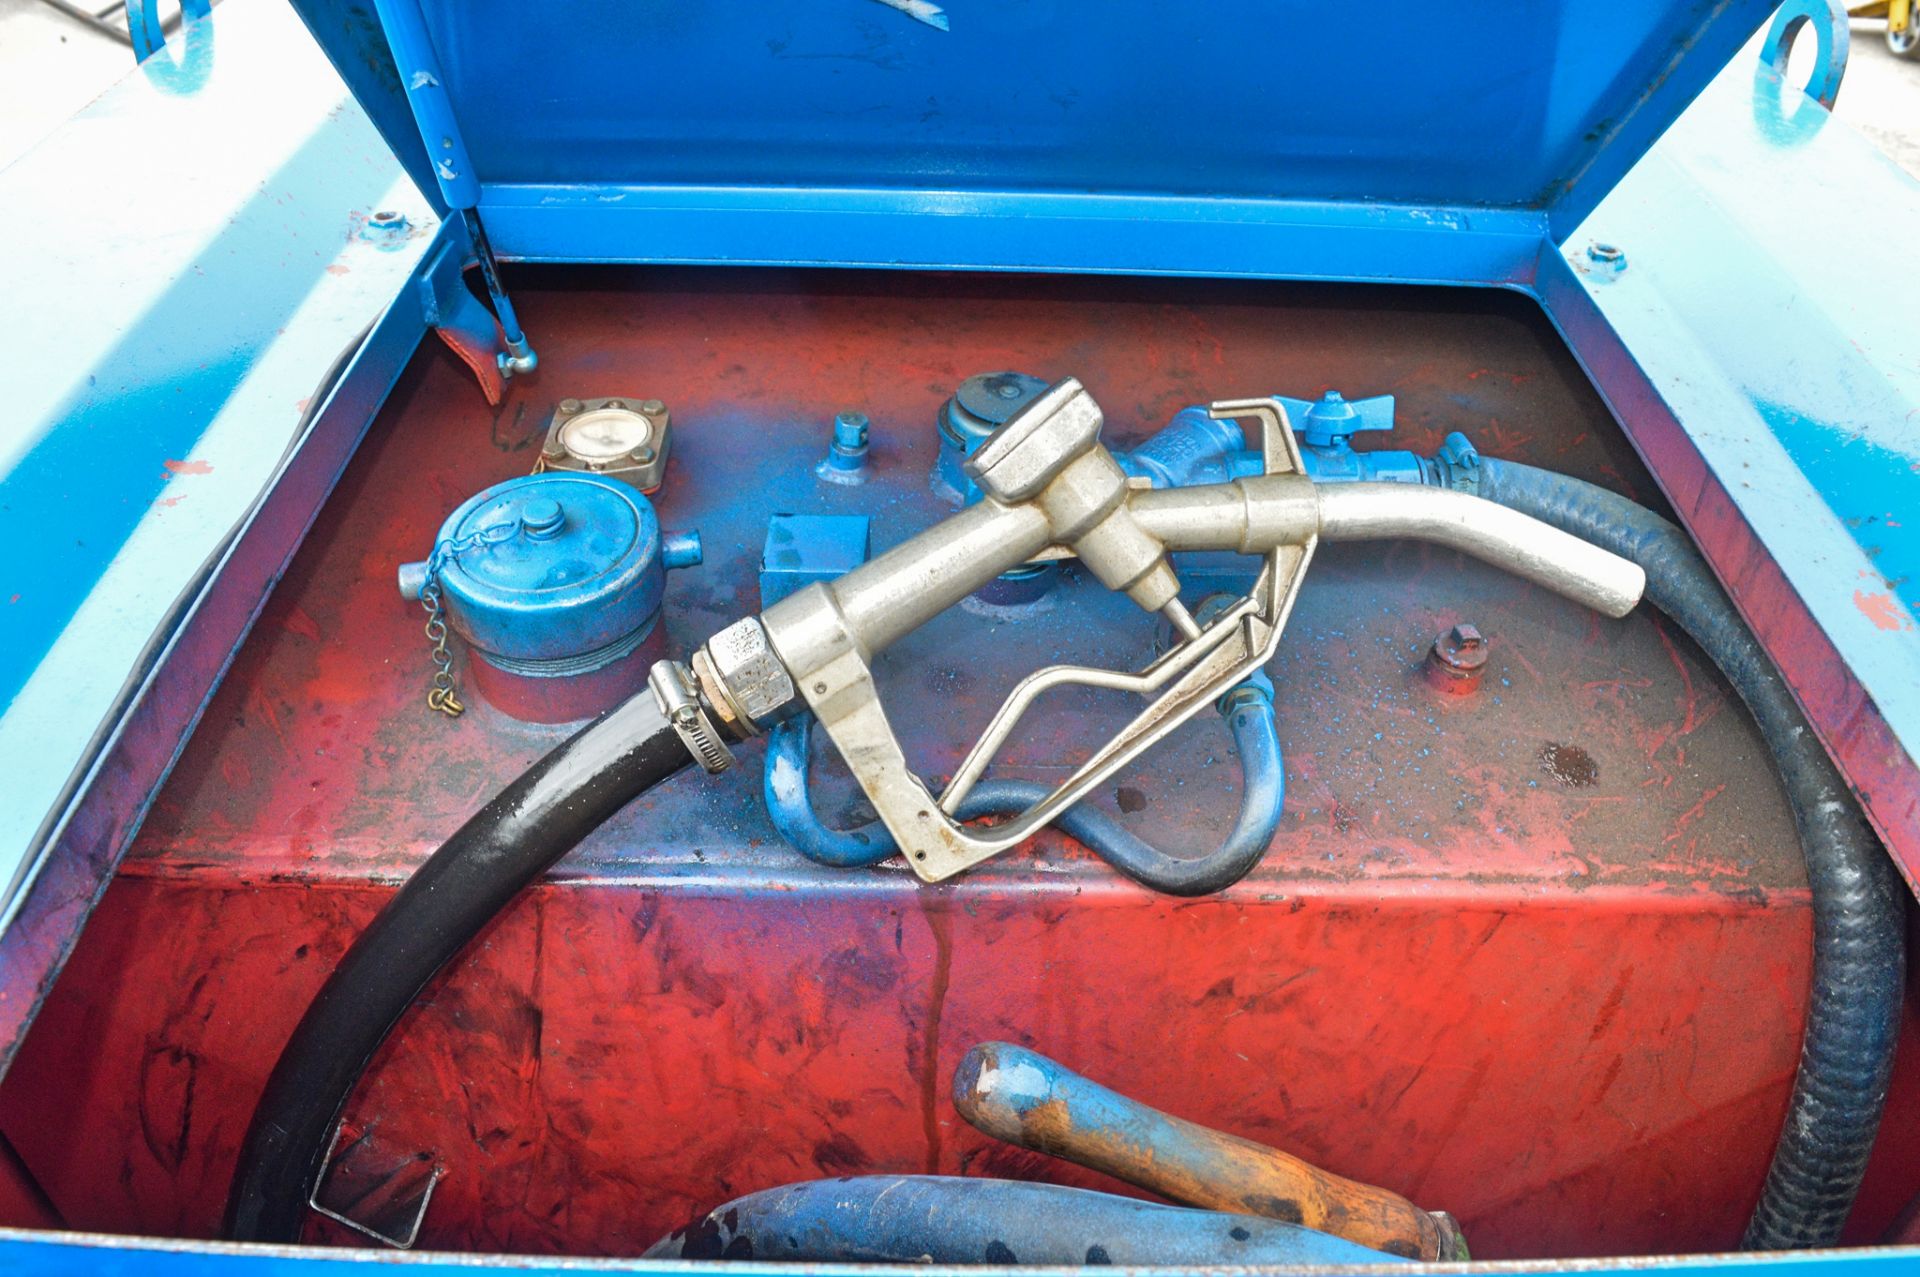 Western Trans Cube 950 litre fast tow bunded fuel bowser c/w hand pump, delivery hose & nozzle - Image 3 of 3